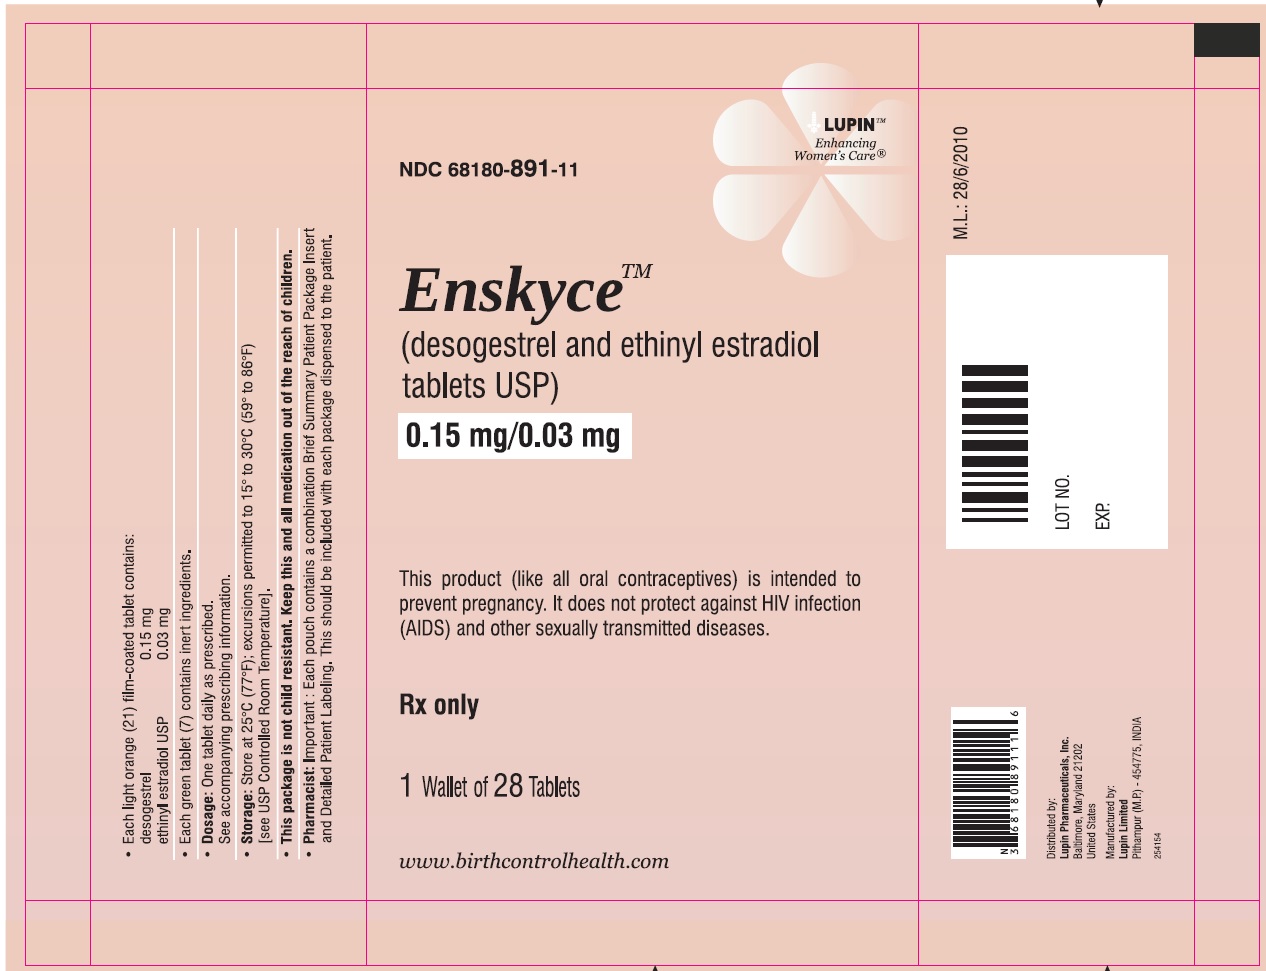 Enskyce
(desogestrel and ethinyl estradiol Tablets USP) 
0.15 mg/0.03 mg 
Rx Only
NDC 68180-882-11
																											Pouch Label: 1 Wallet of 28 Tablets